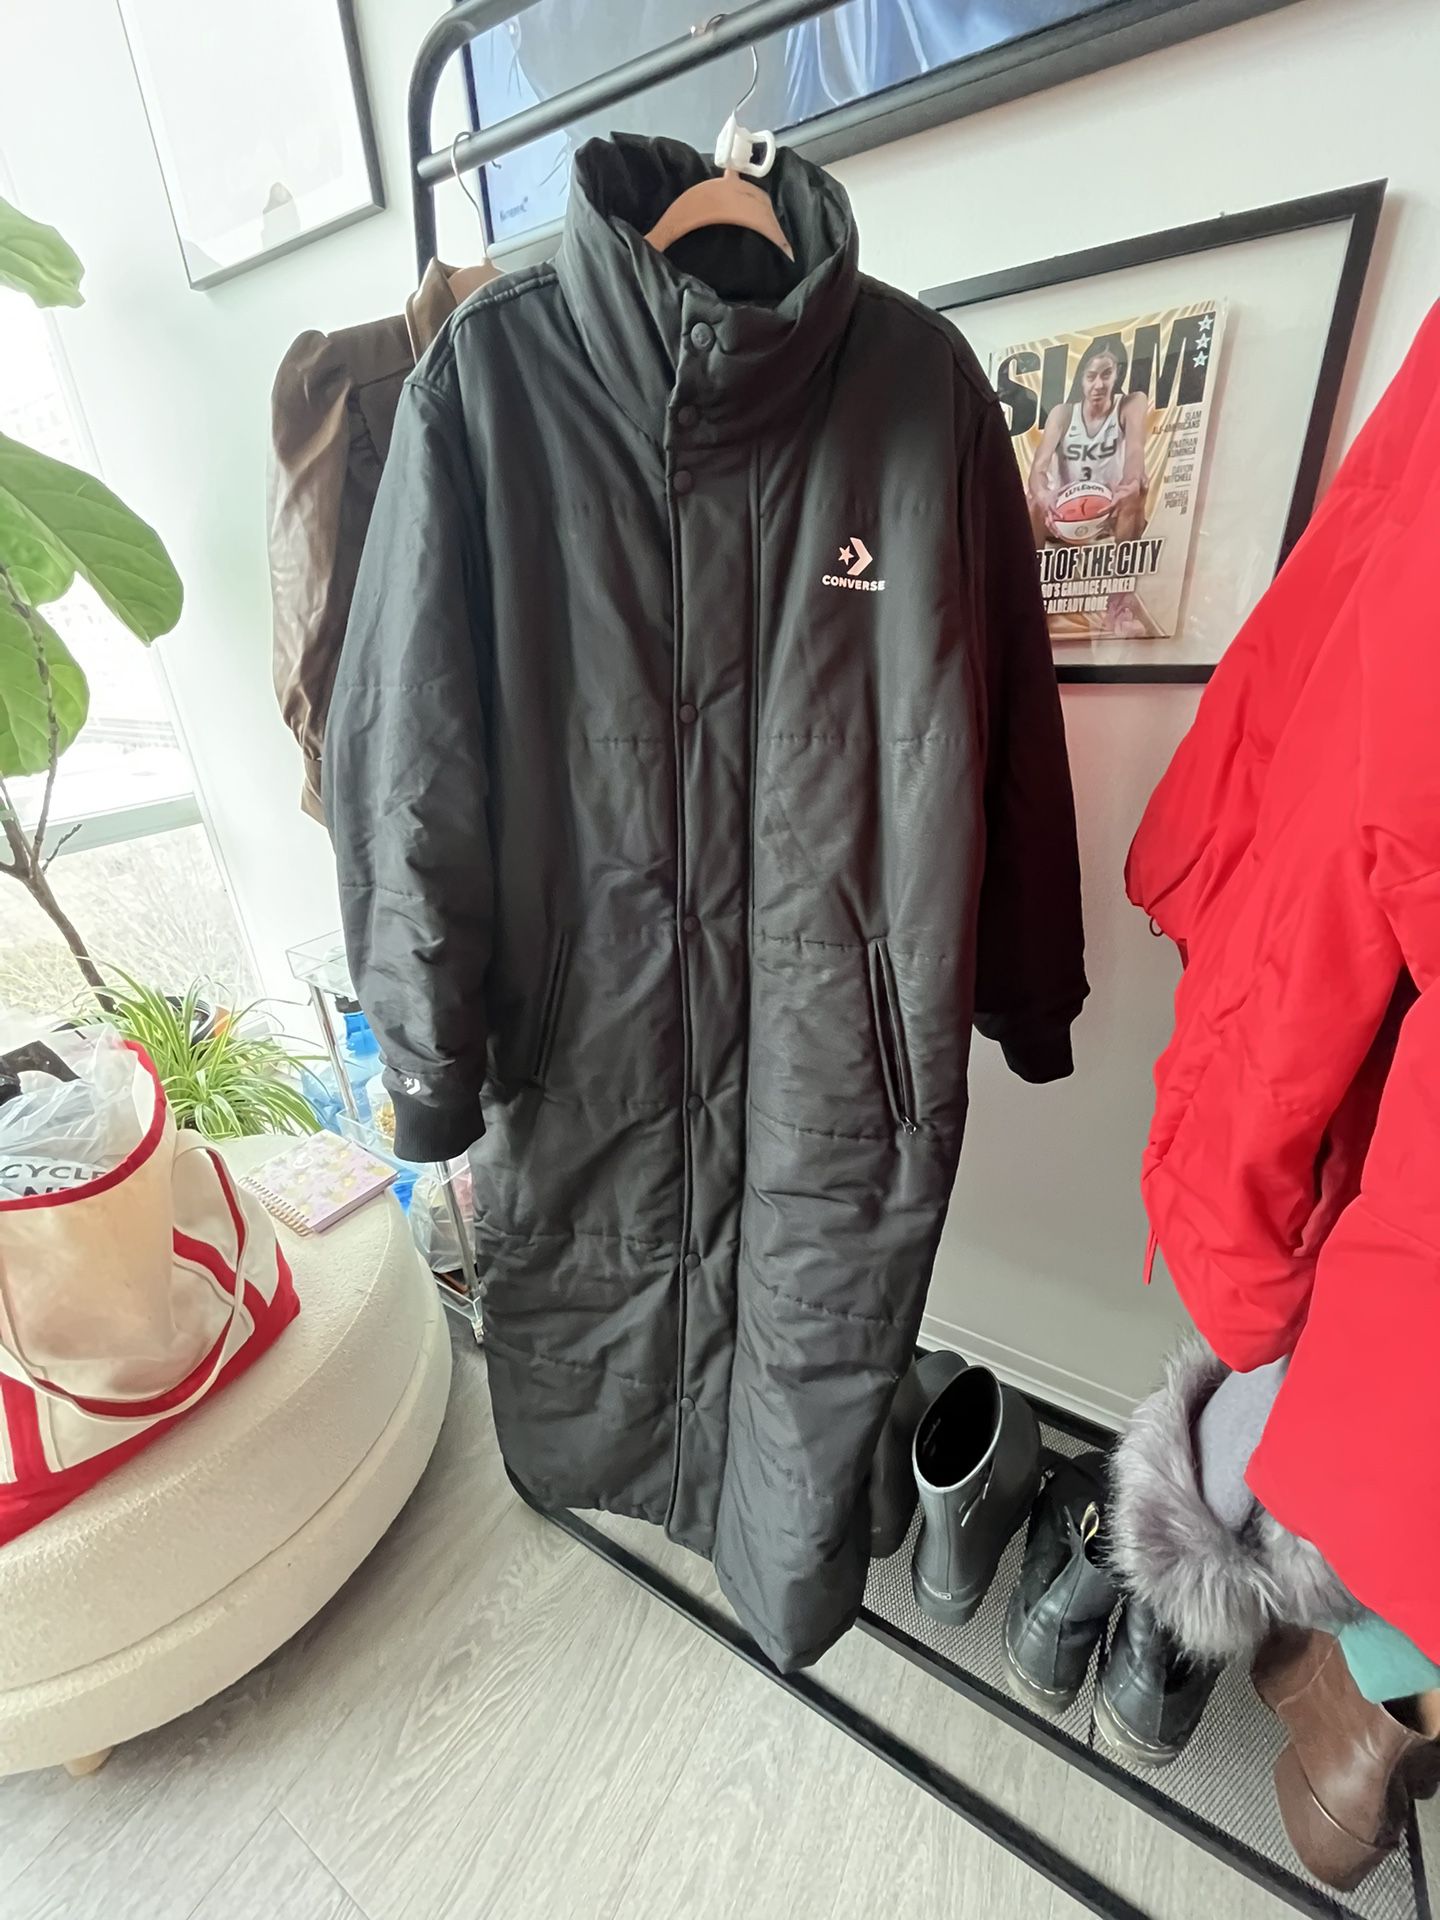 Women's Large Converse Winter Jacket for Sale Chicago, IL - OfferUp